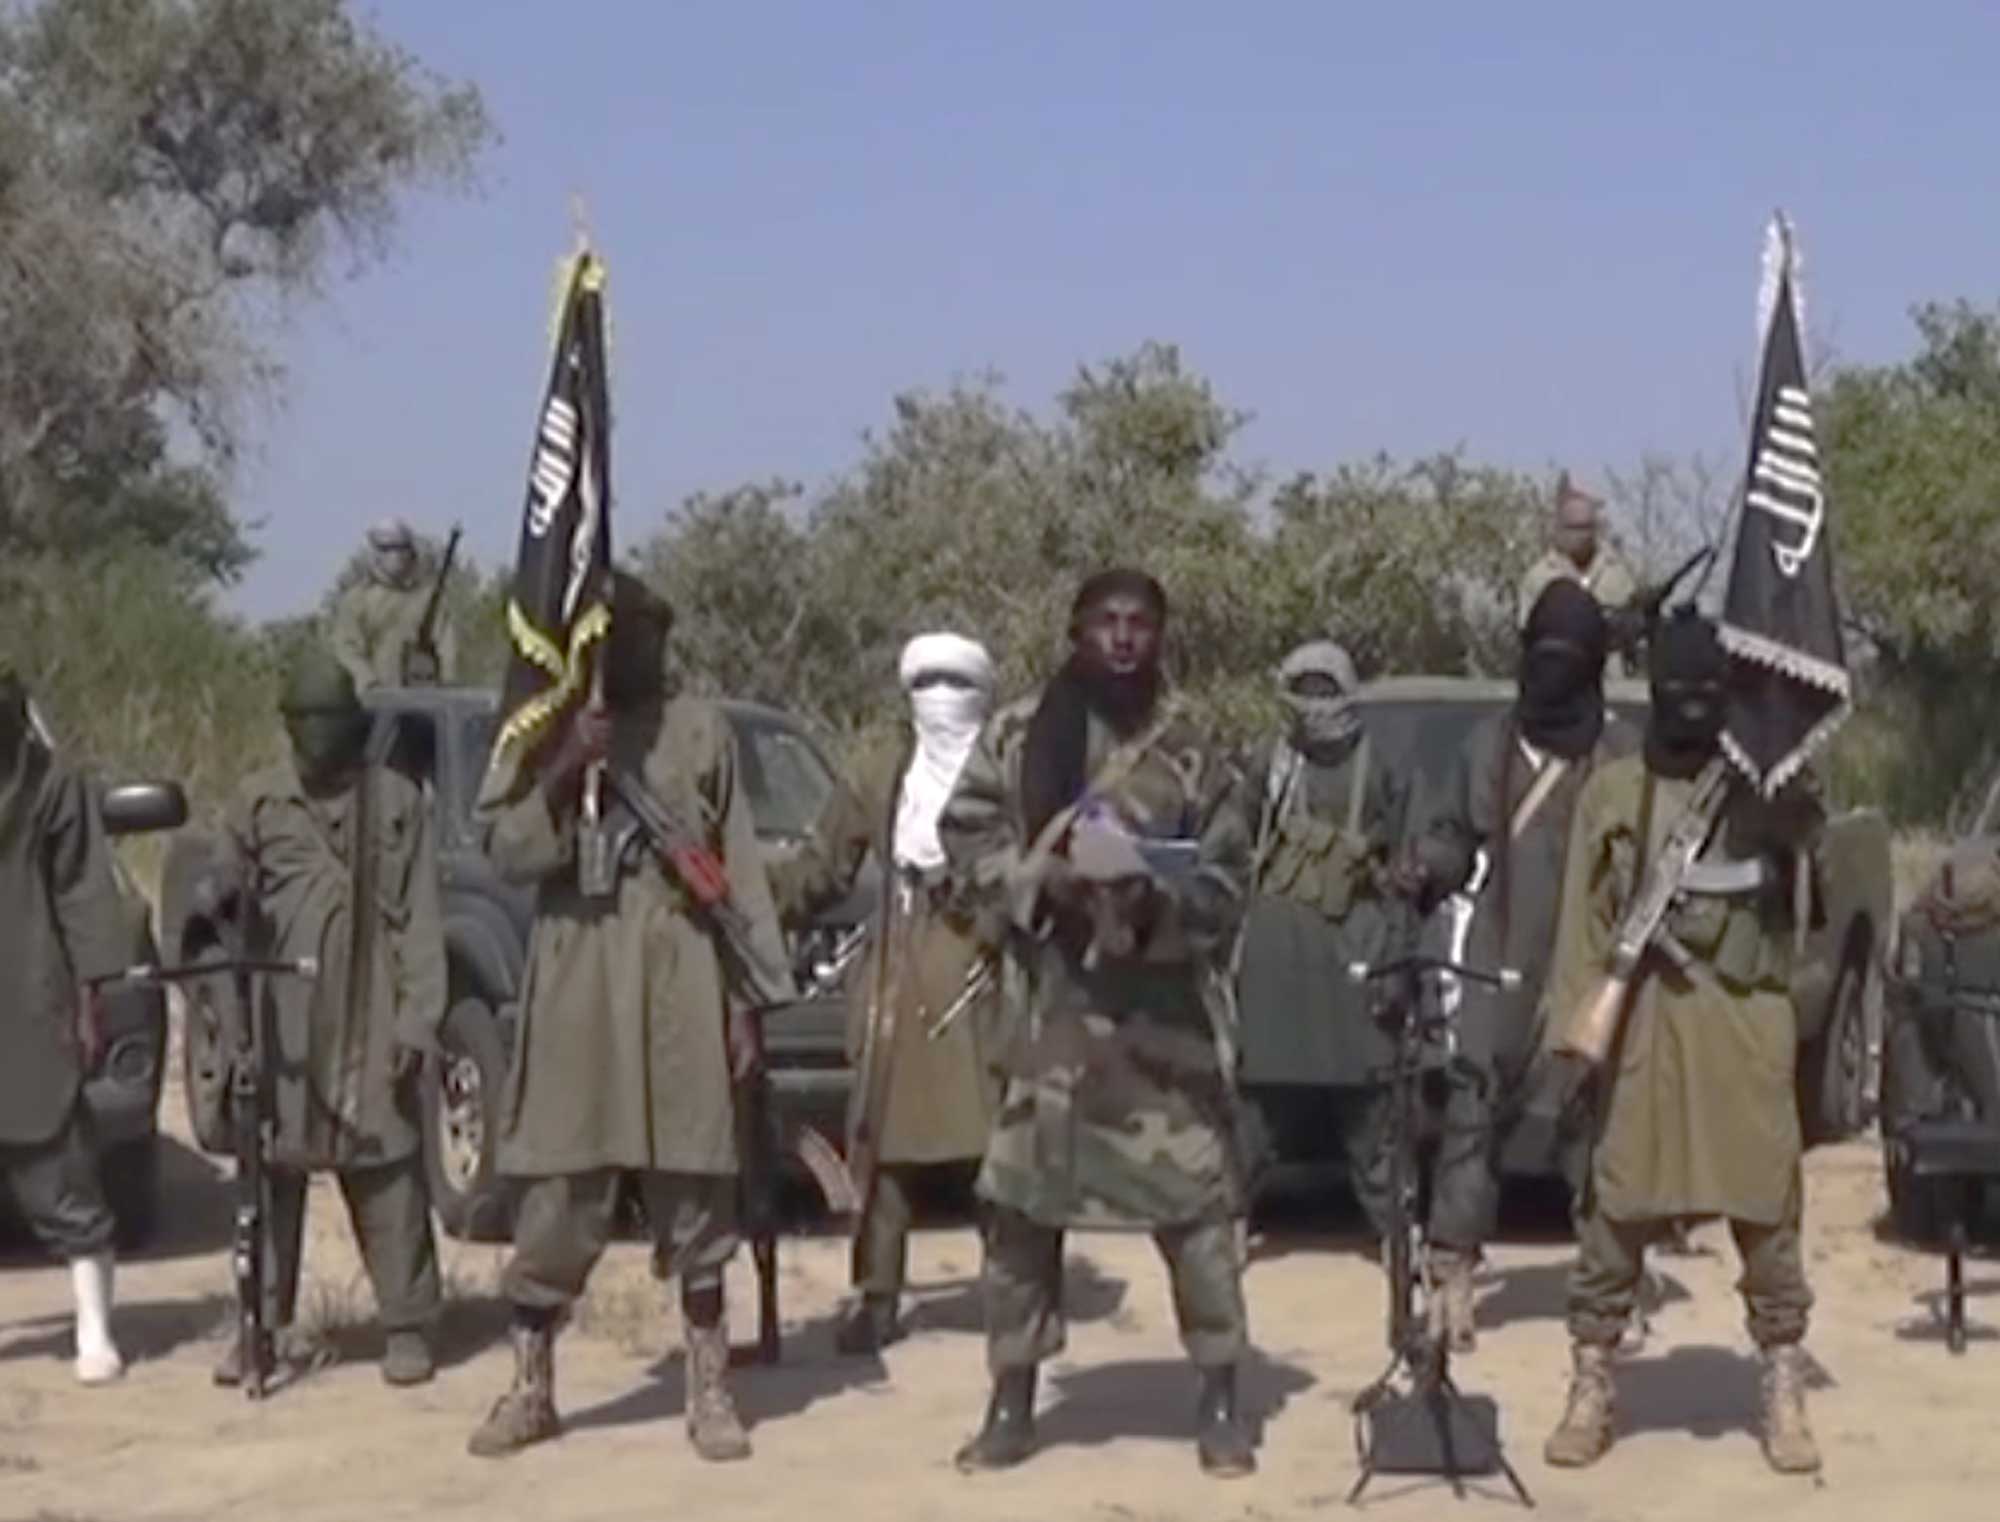 The leader of Nigeria's Islamic extremist group Boko Haram on Oct. 31, 2014.